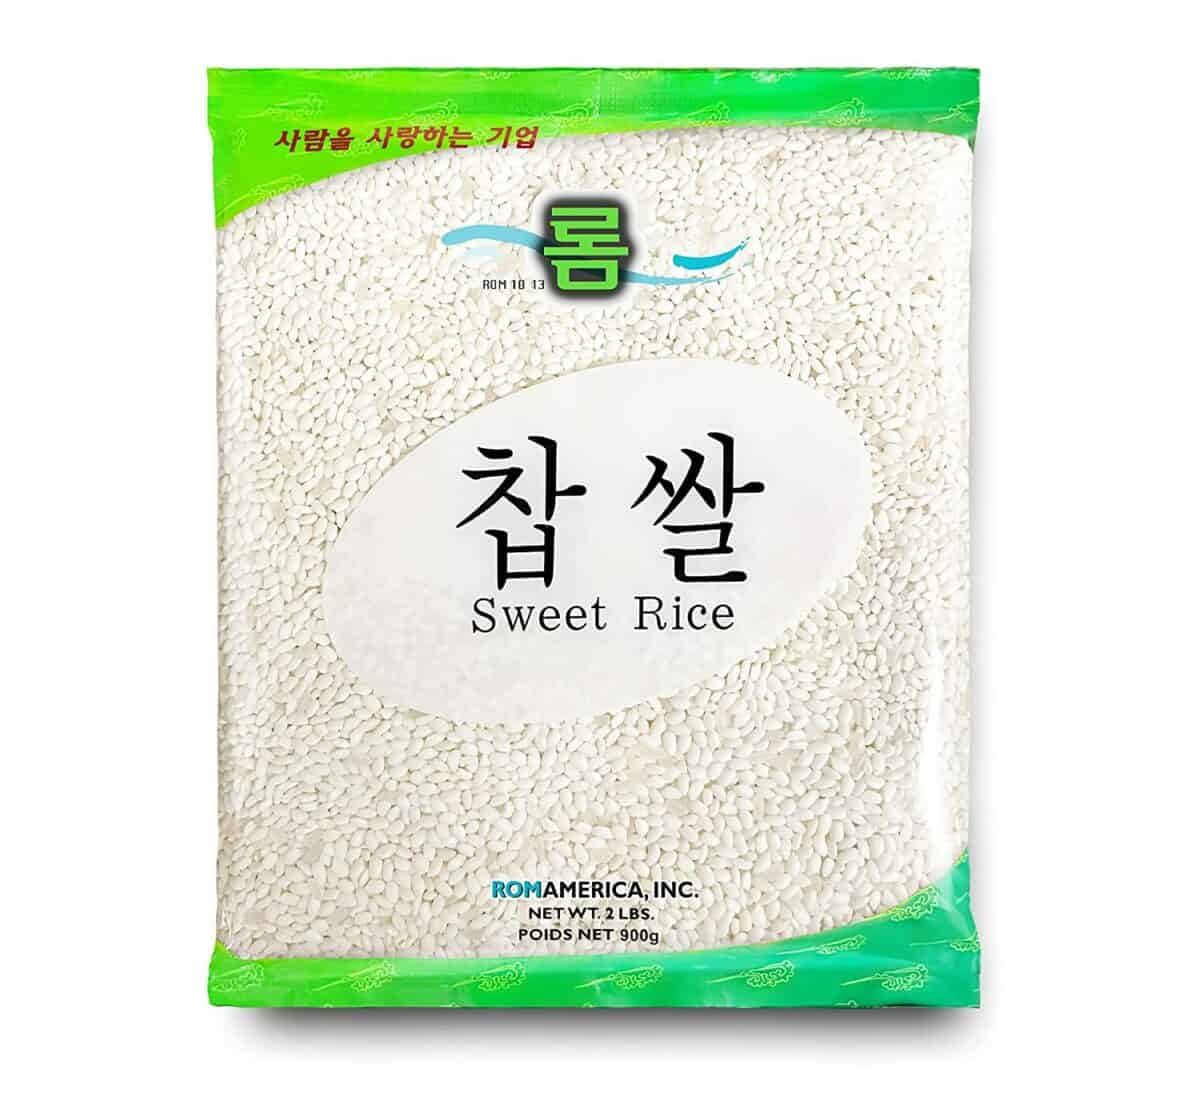 ROM AMERICA Sweet Sticky Glutinous Short Grain White Rice for Asian Cooking and Desserts - Thai Mango Sticky Rice, Sweets, Pudding, Korean Tteok Rice Cake